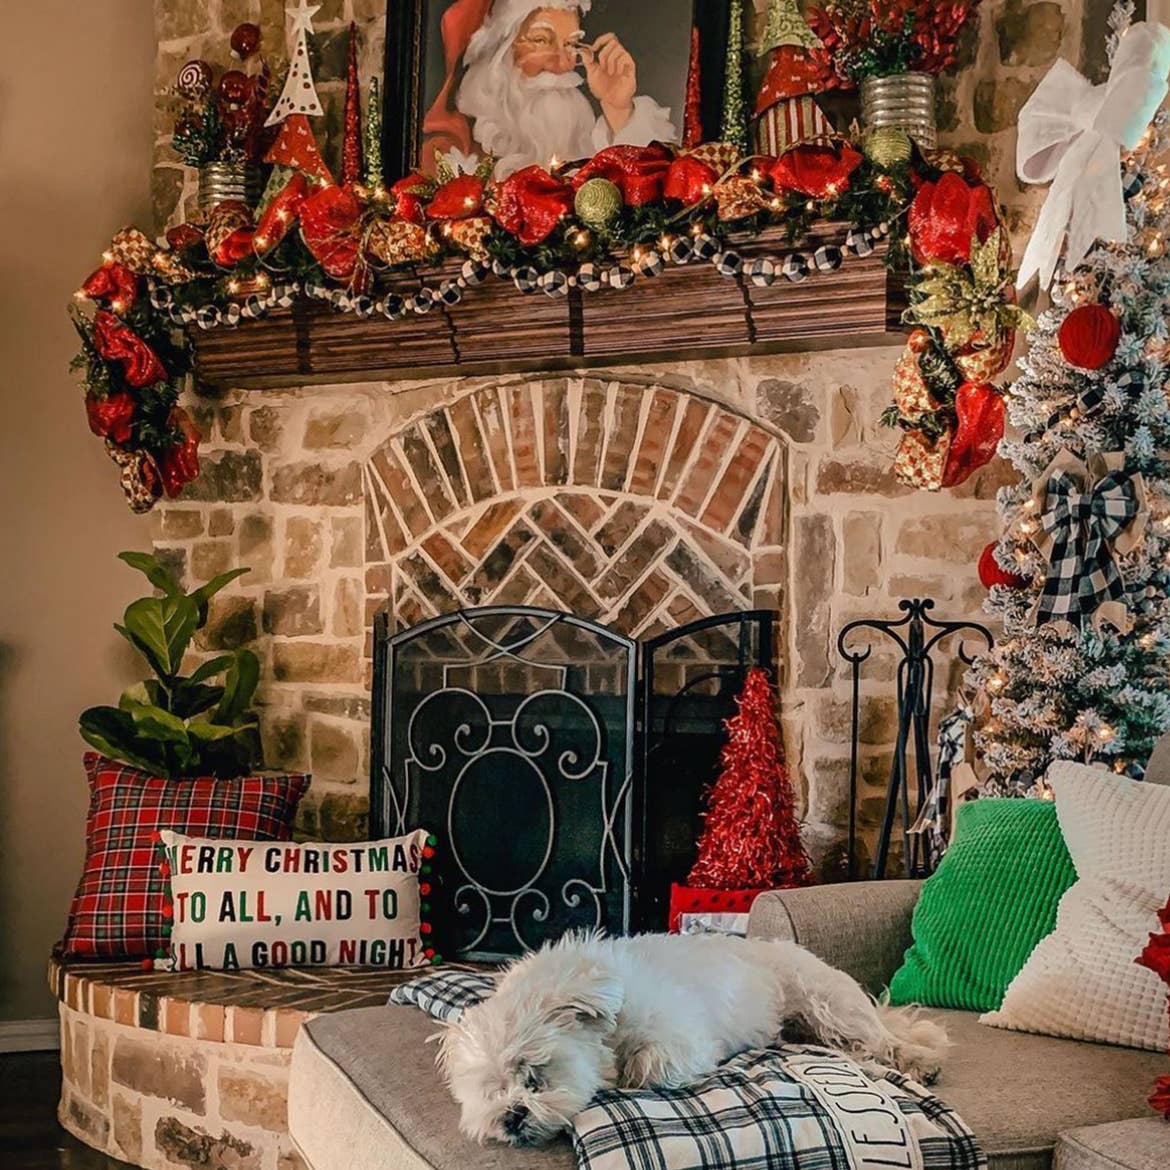 A small 'pencil tree' decked out in holiday decor next to a mantle decked out in holiday decor.